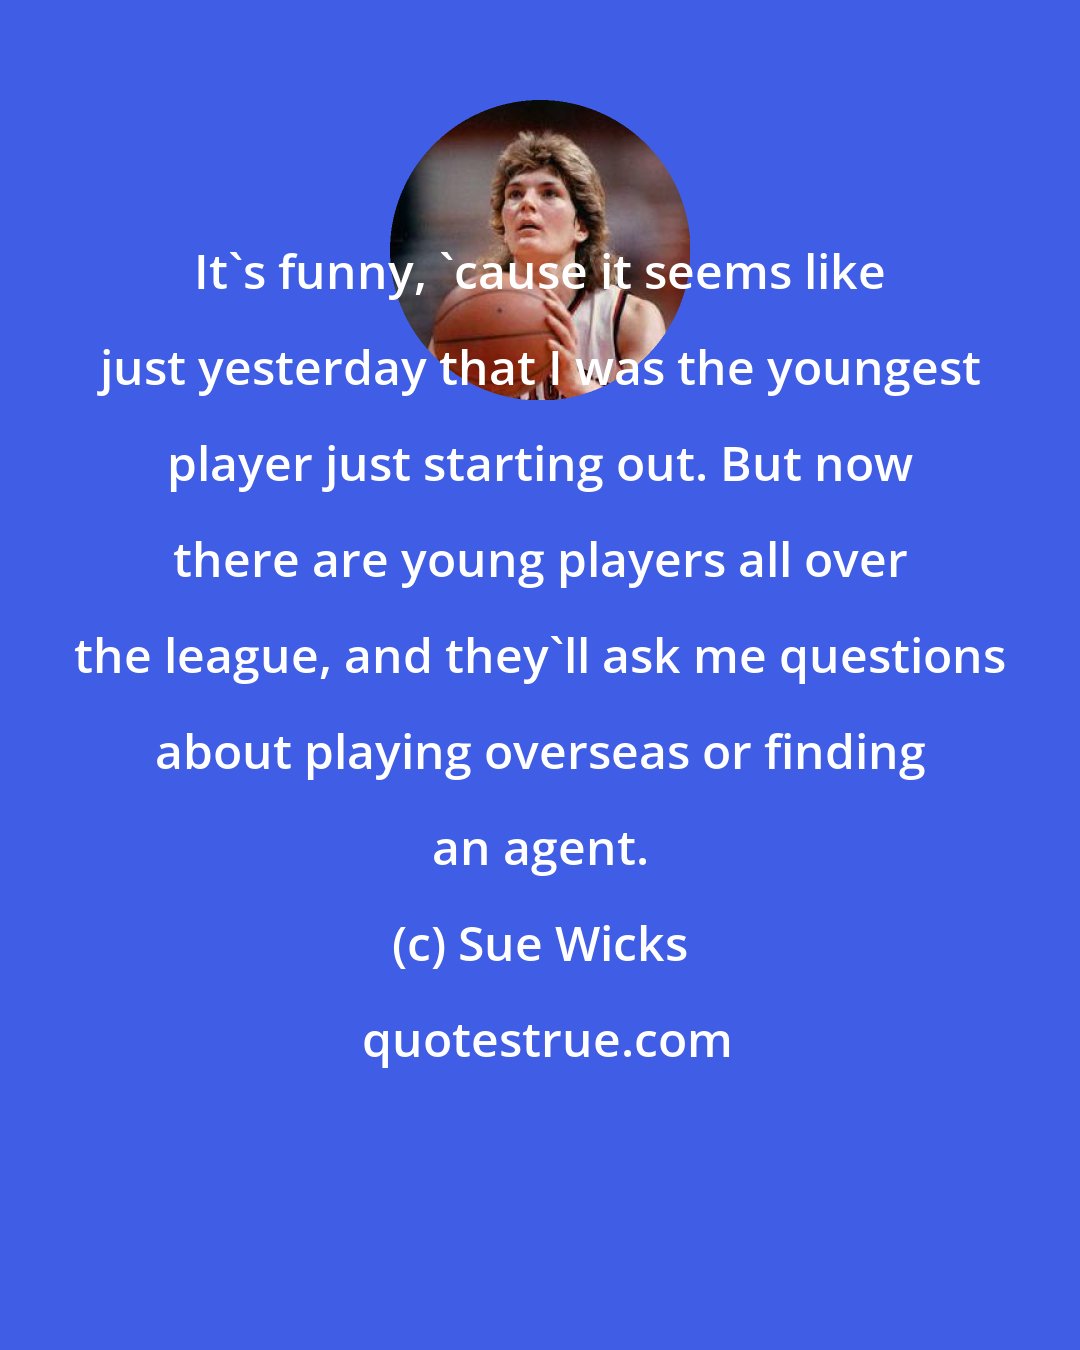 Sue Wicks: It's funny, 'cause it seems like just yesterday that I was the youngest player just starting out. But now there are young players all over the league, and they'll ask me questions about playing overseas or finding an agent.